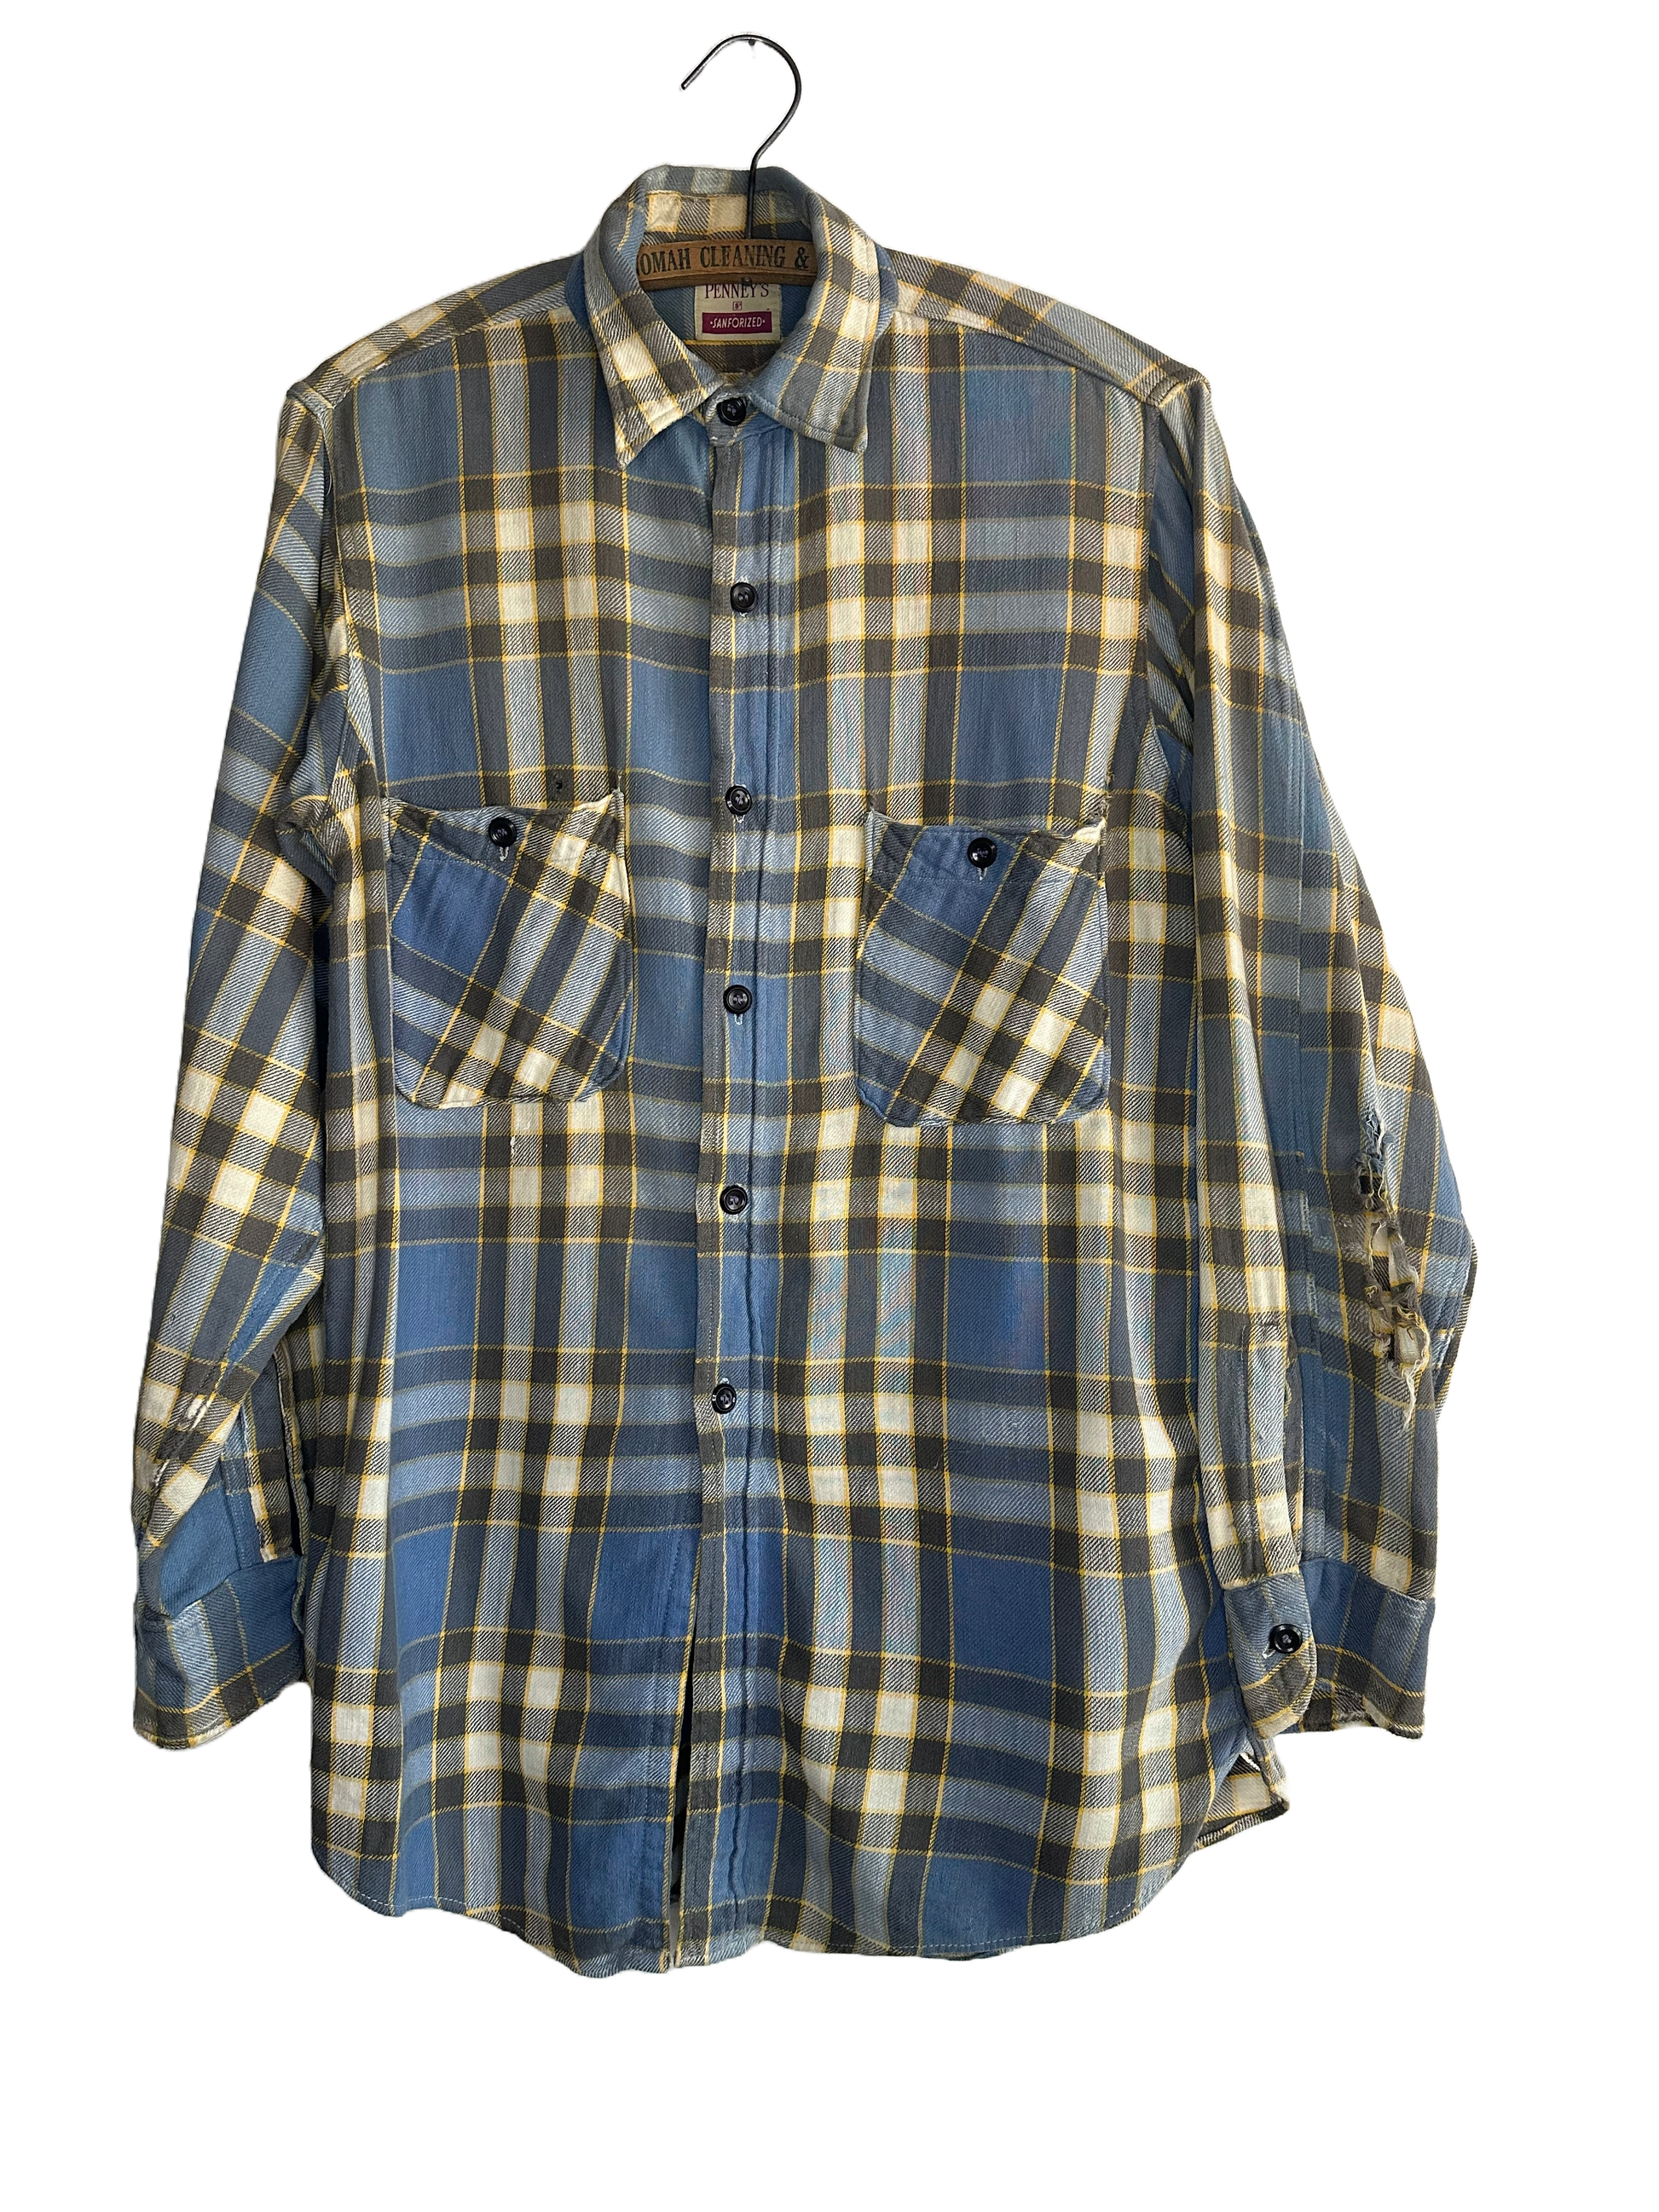 1950s flannel shirt by penneys. 2 pockets in front, plaid pattern of blue yellow and black. black buttons 